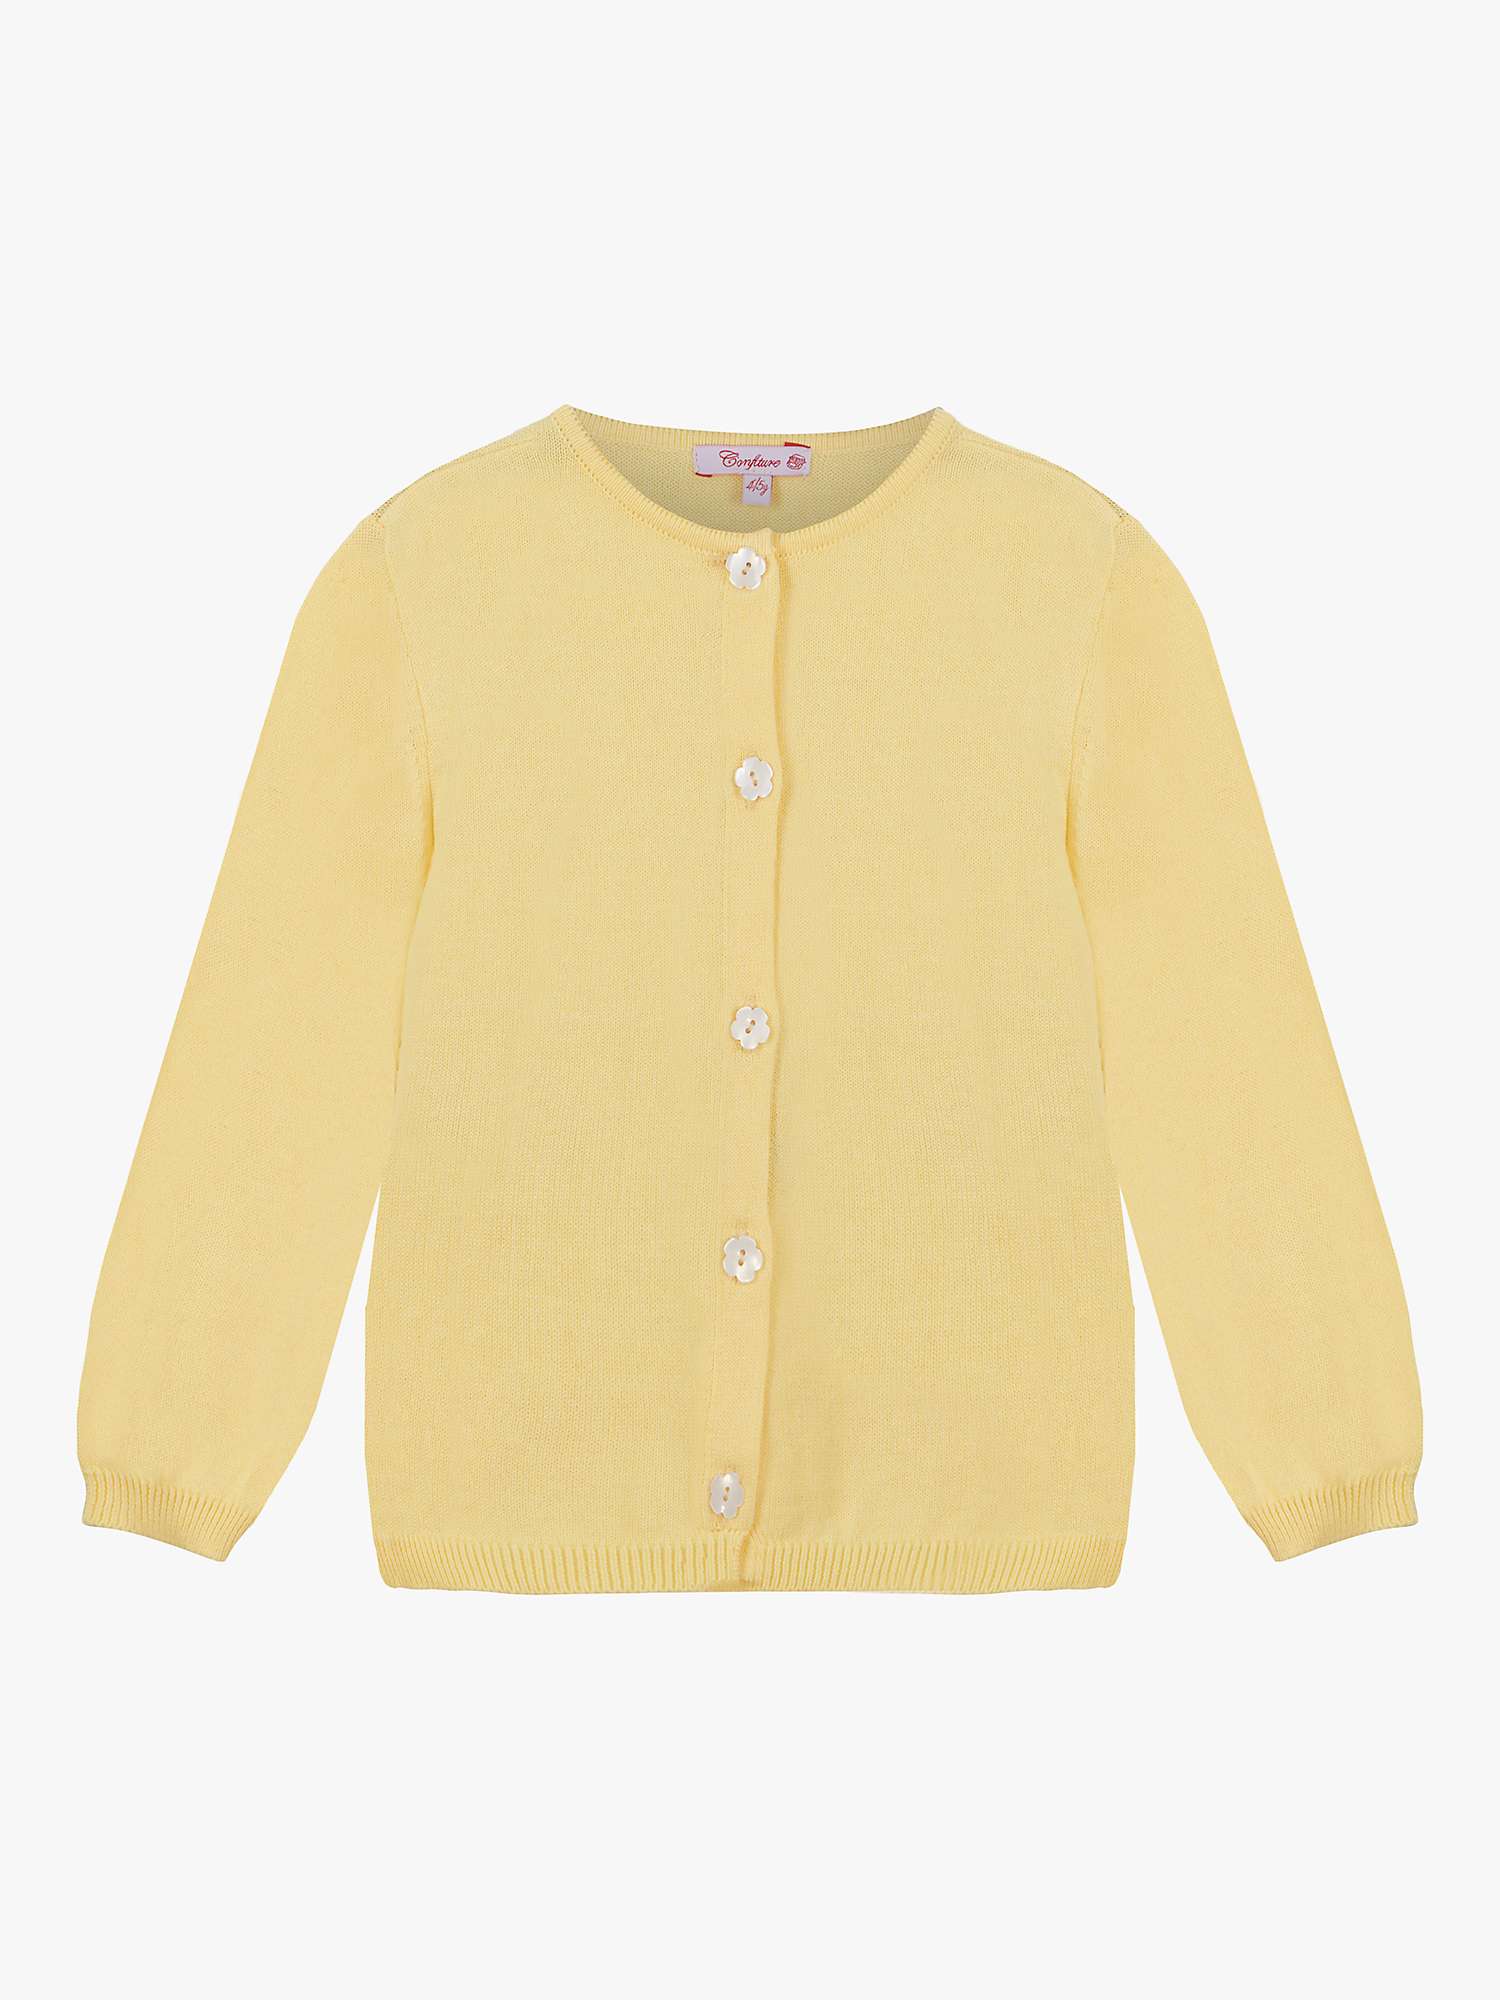 Buy Trotters Kids' Pretty Button Cardigan Online at johnlewis.com